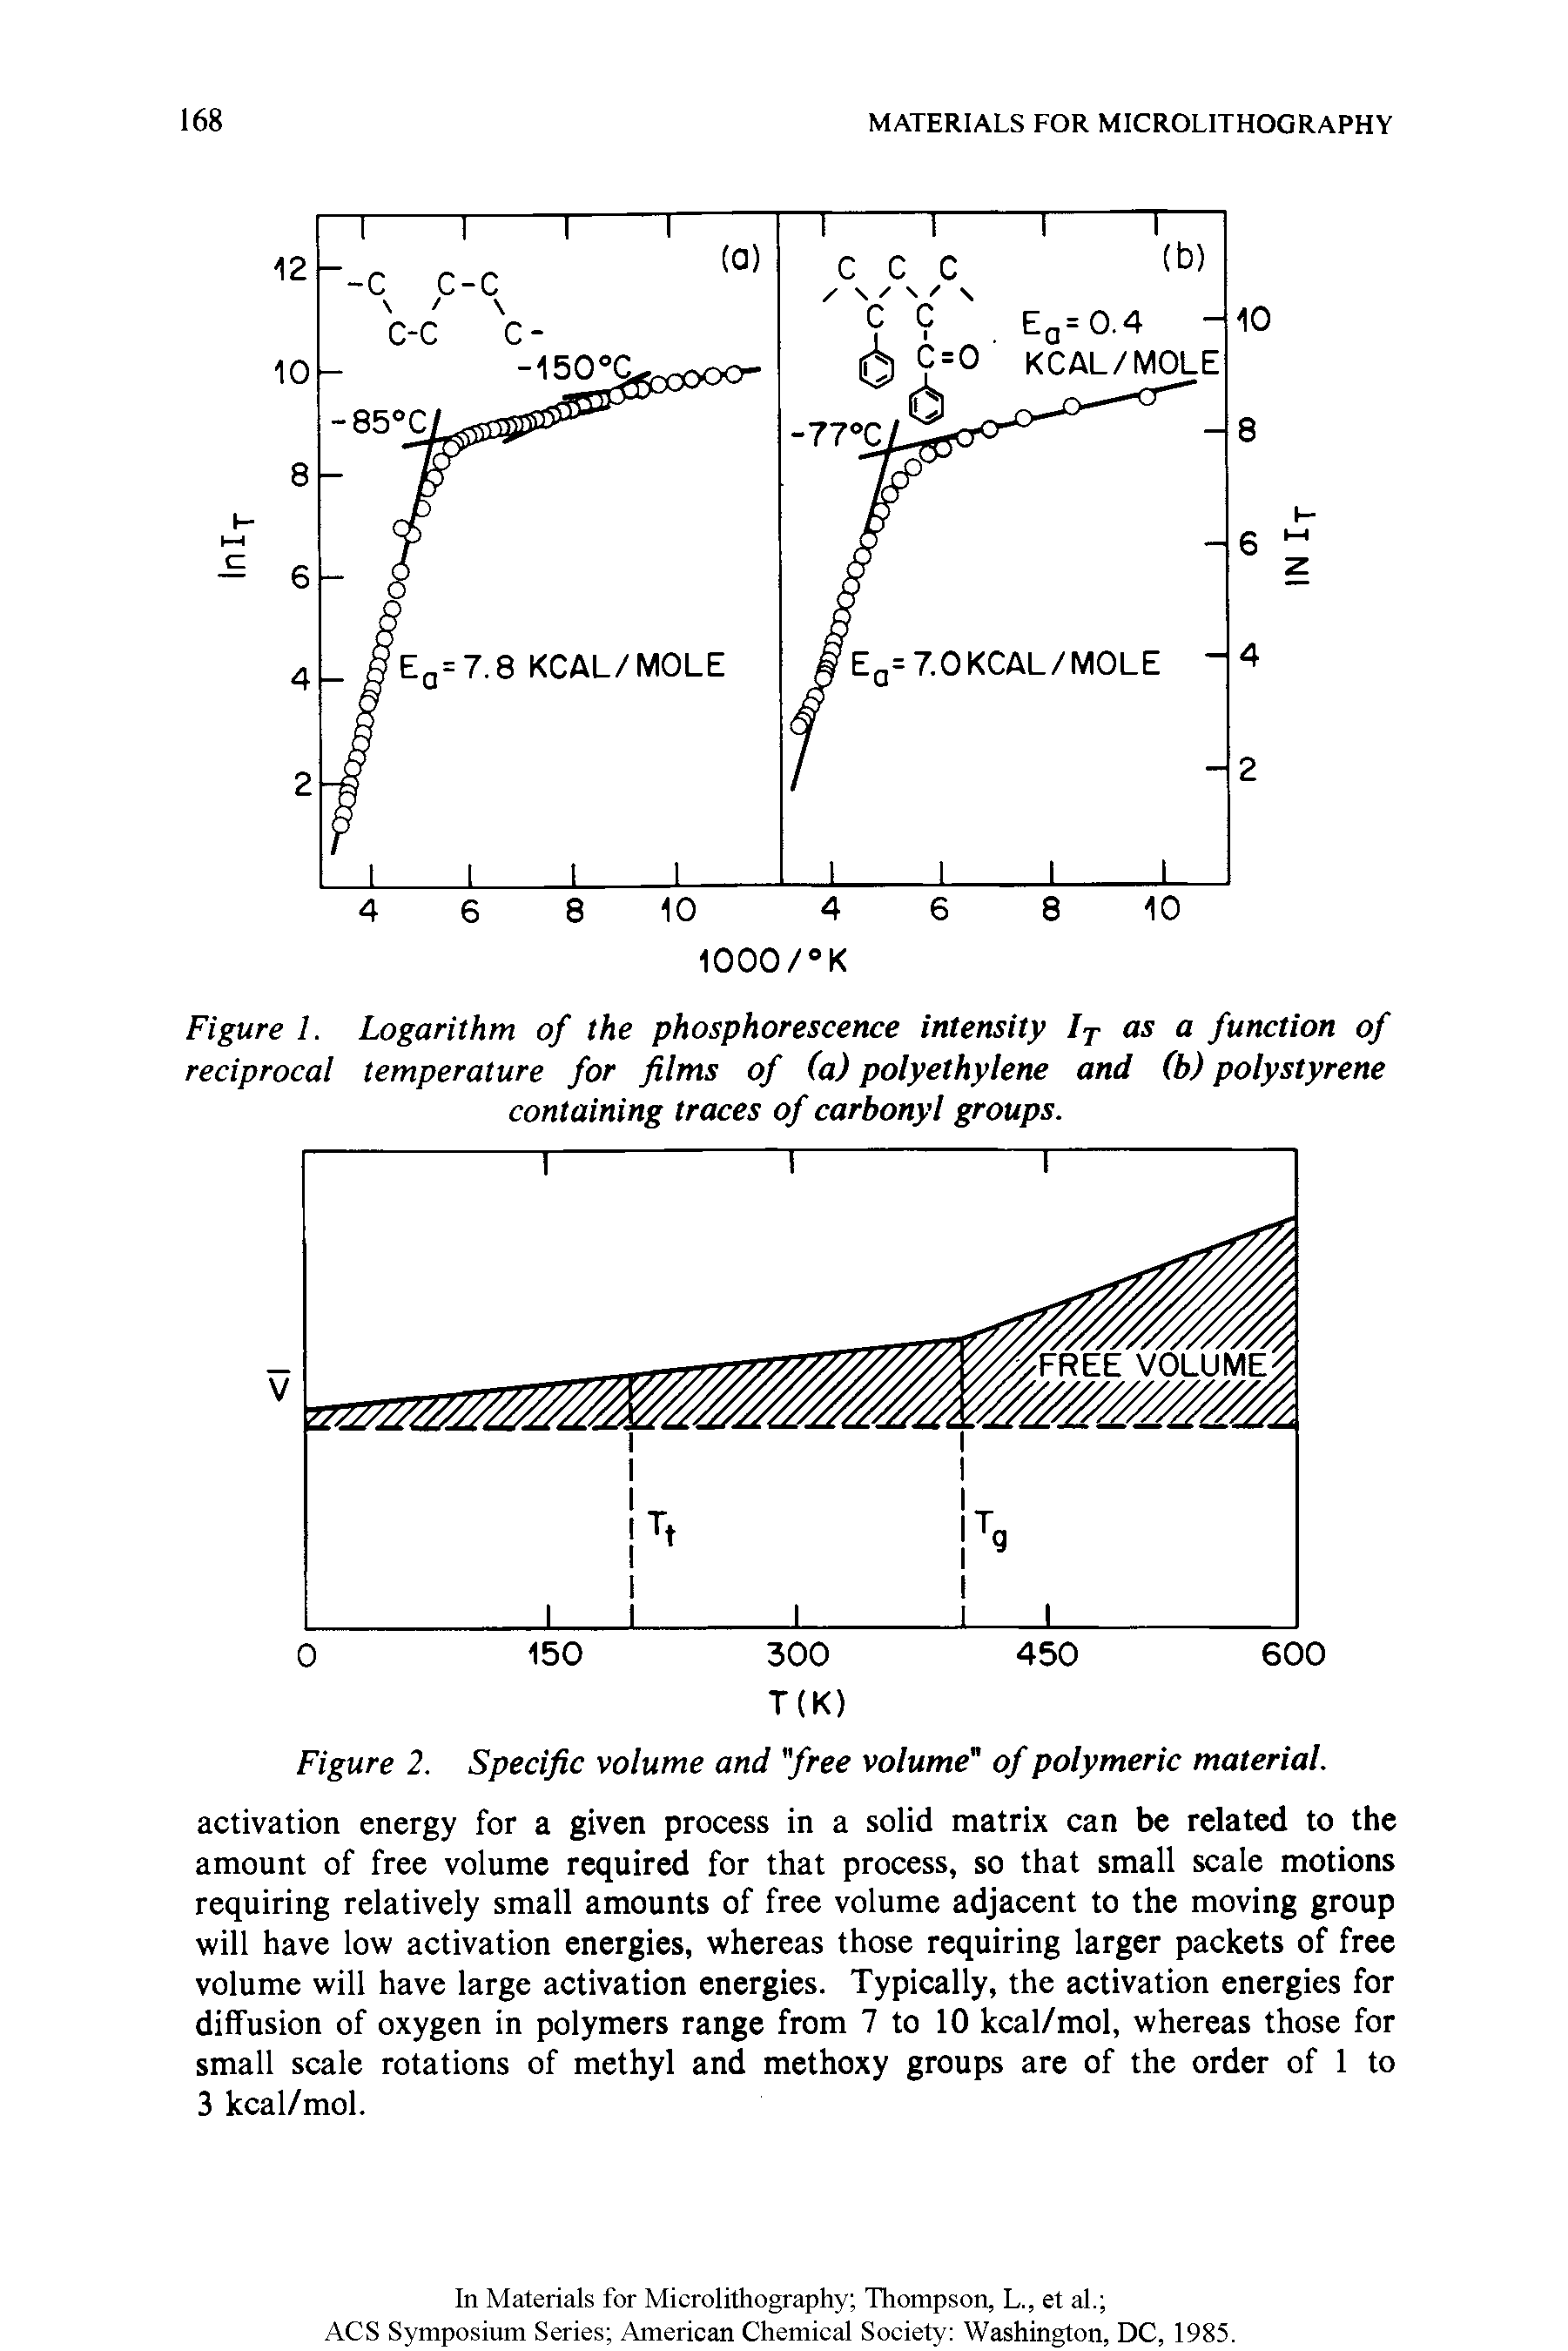 Figure 2. Specific volume and "free volume" of polymeric material.